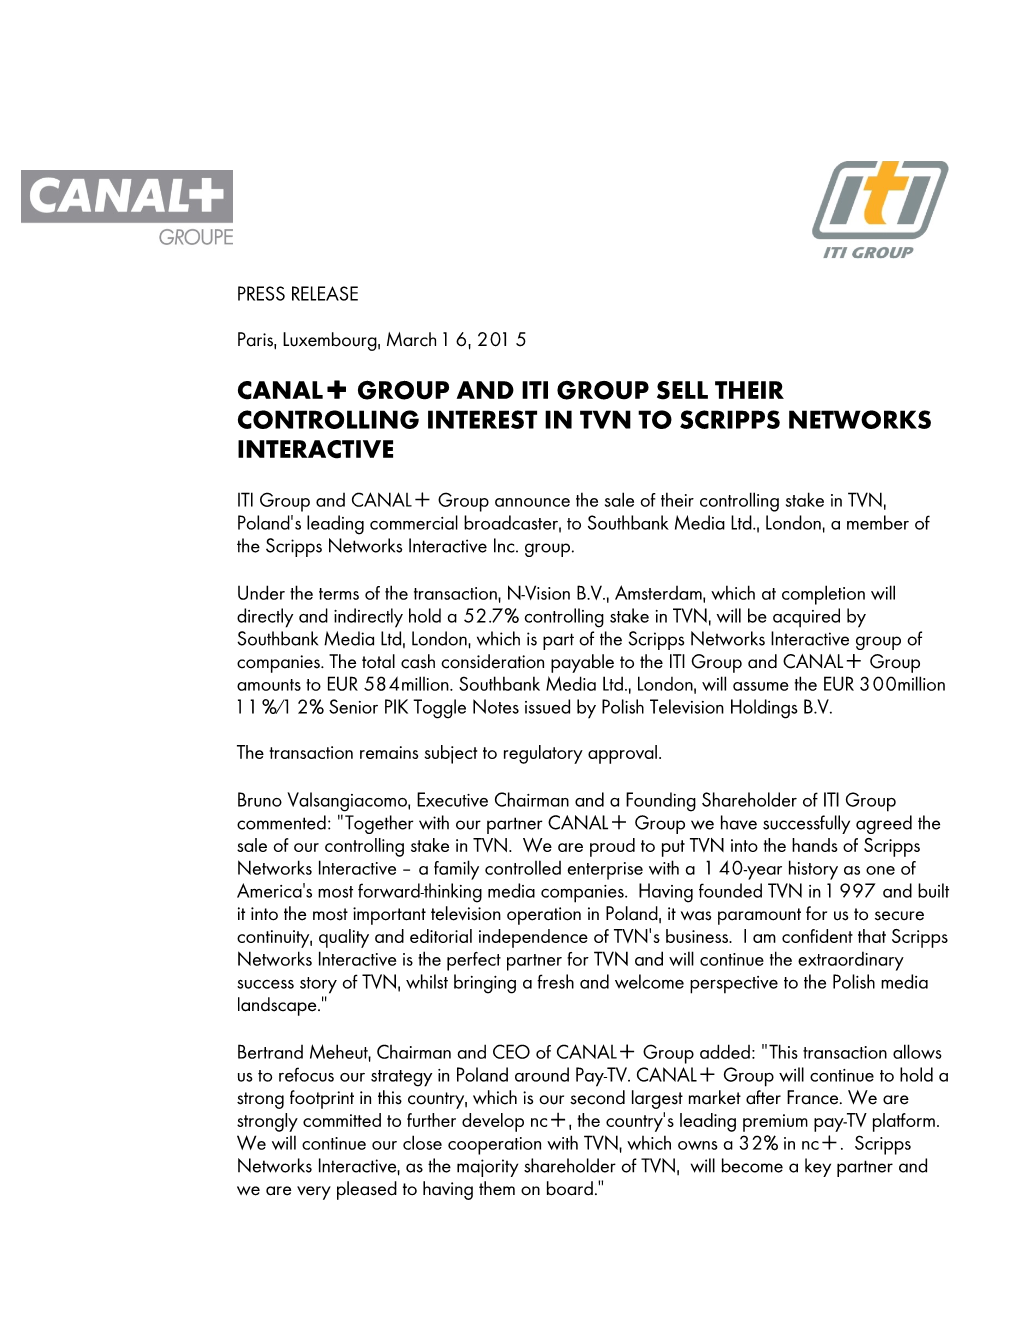 Canal+ Group and Iti Group Sell Their Controlling Interest in Tvn to Scripps Networks Interactive